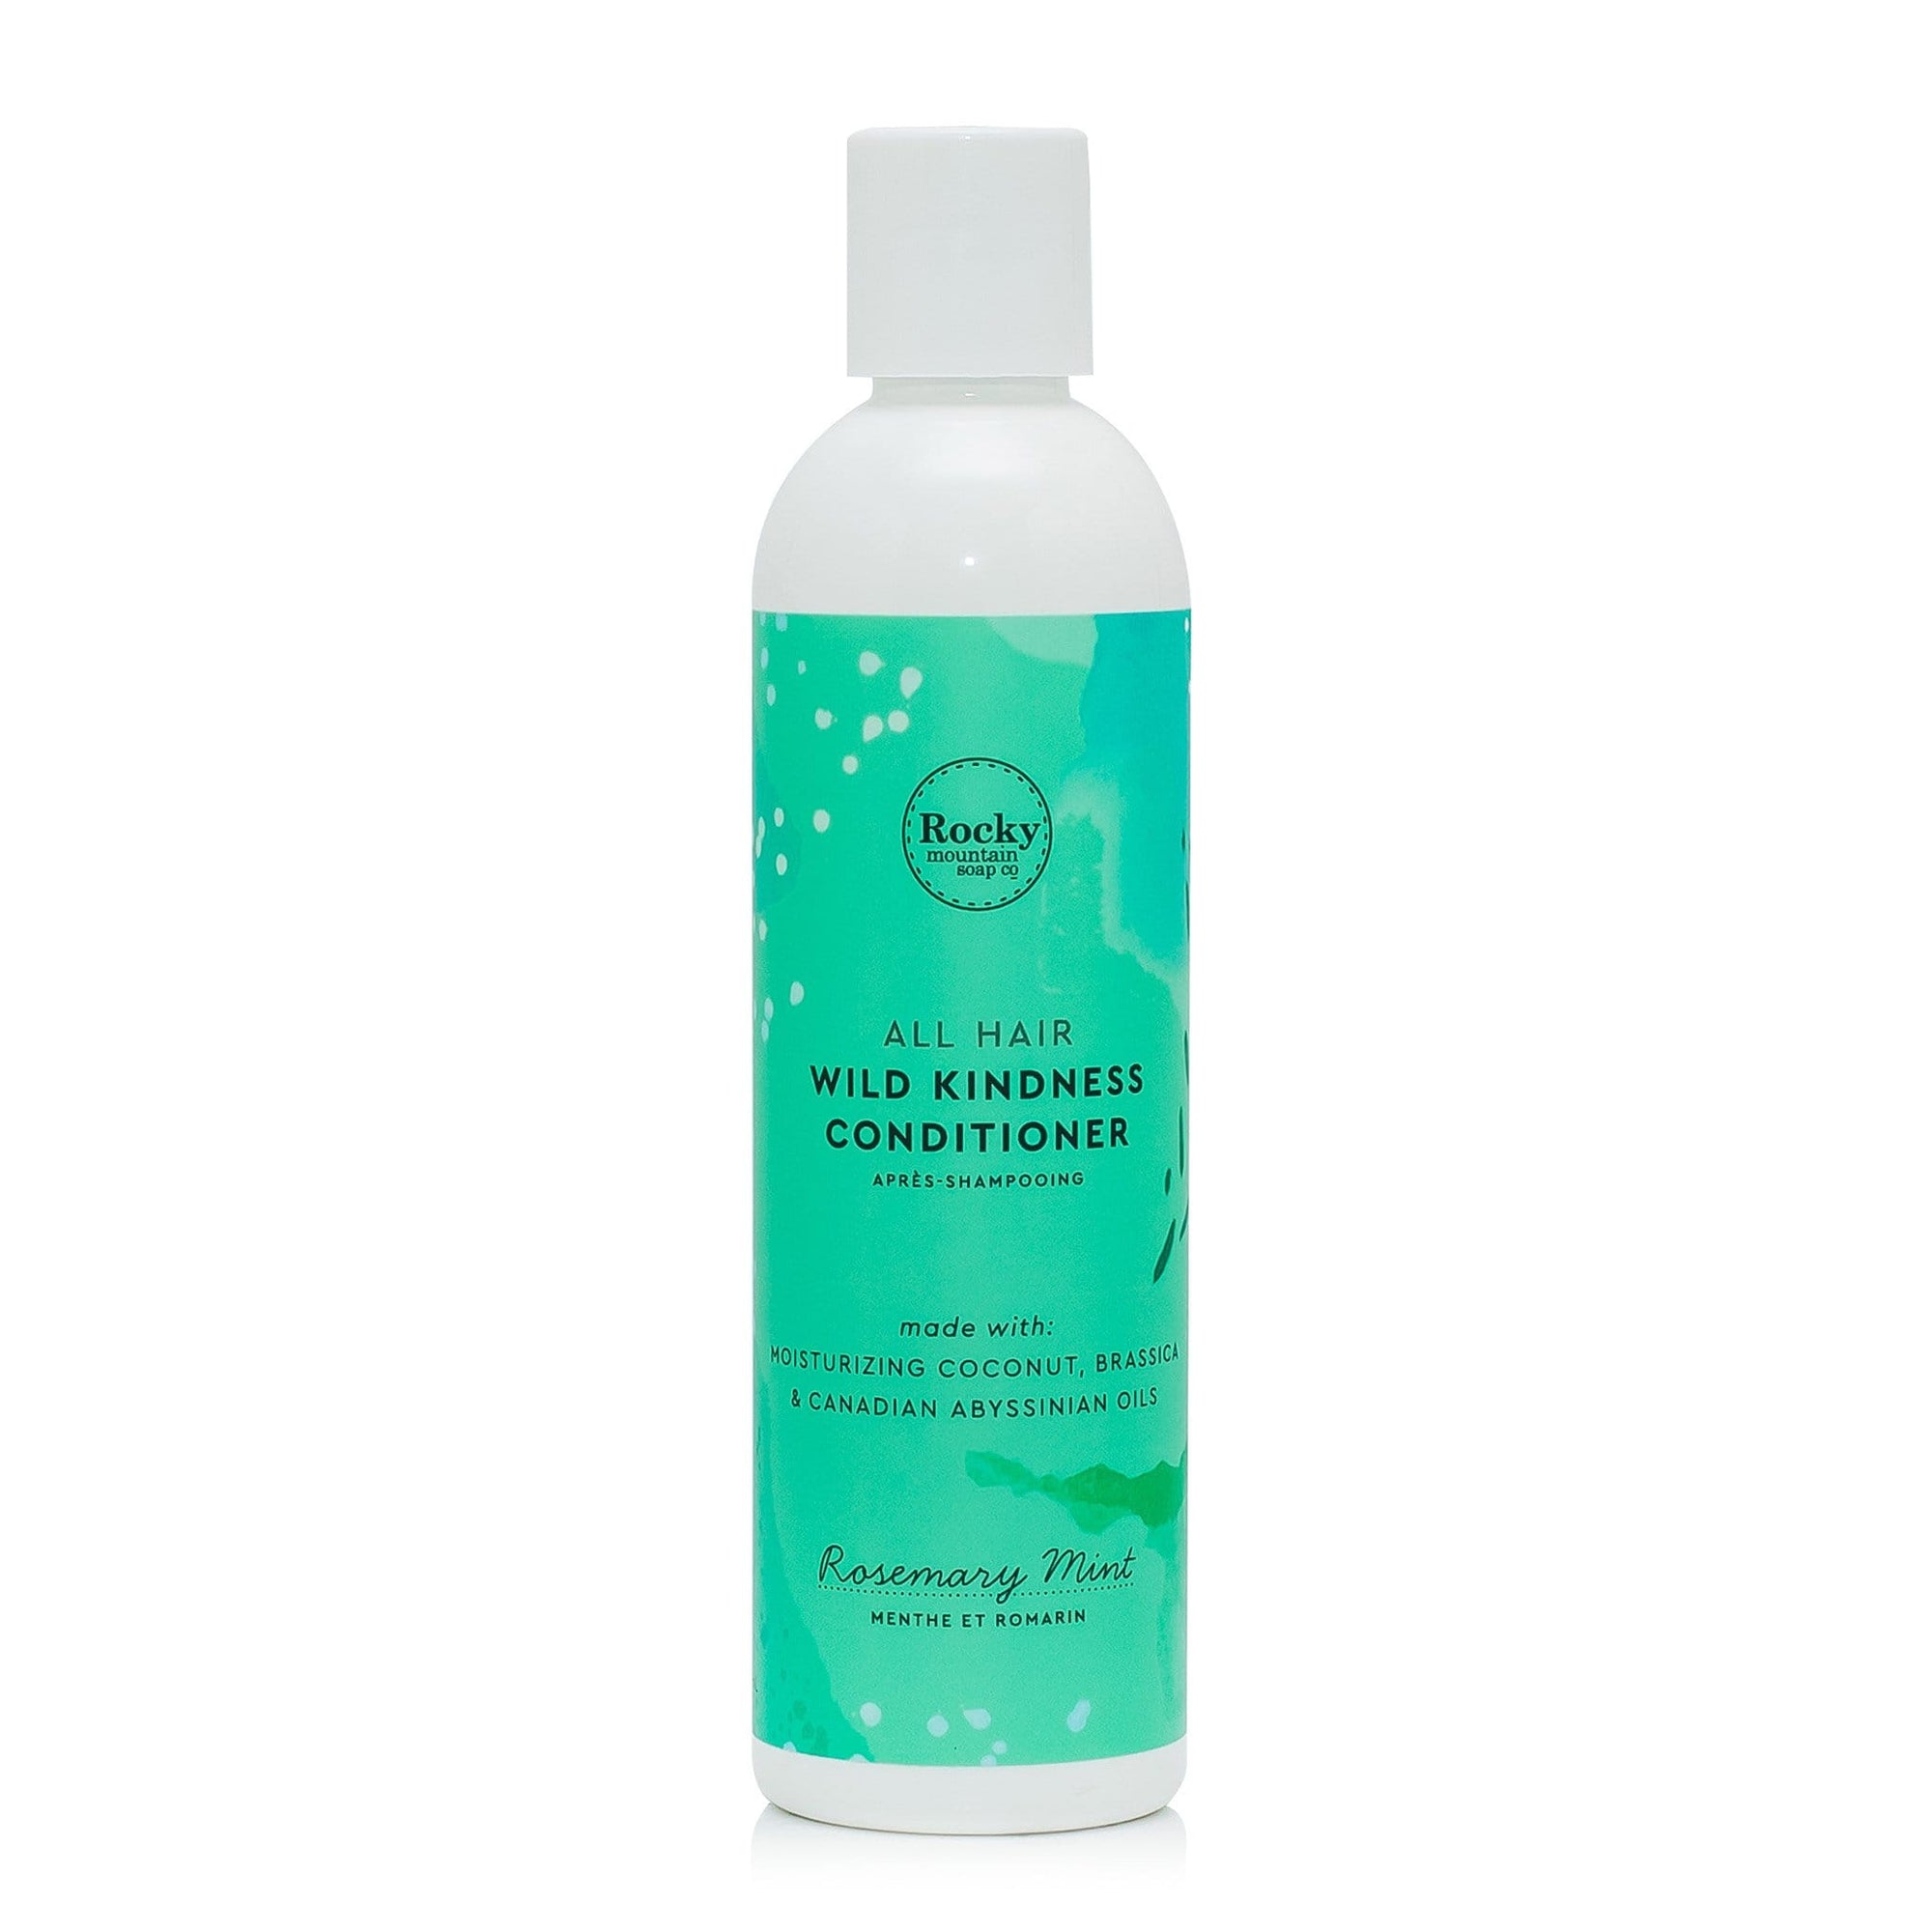 Rosemary Mint Wild Kindness Conditioner